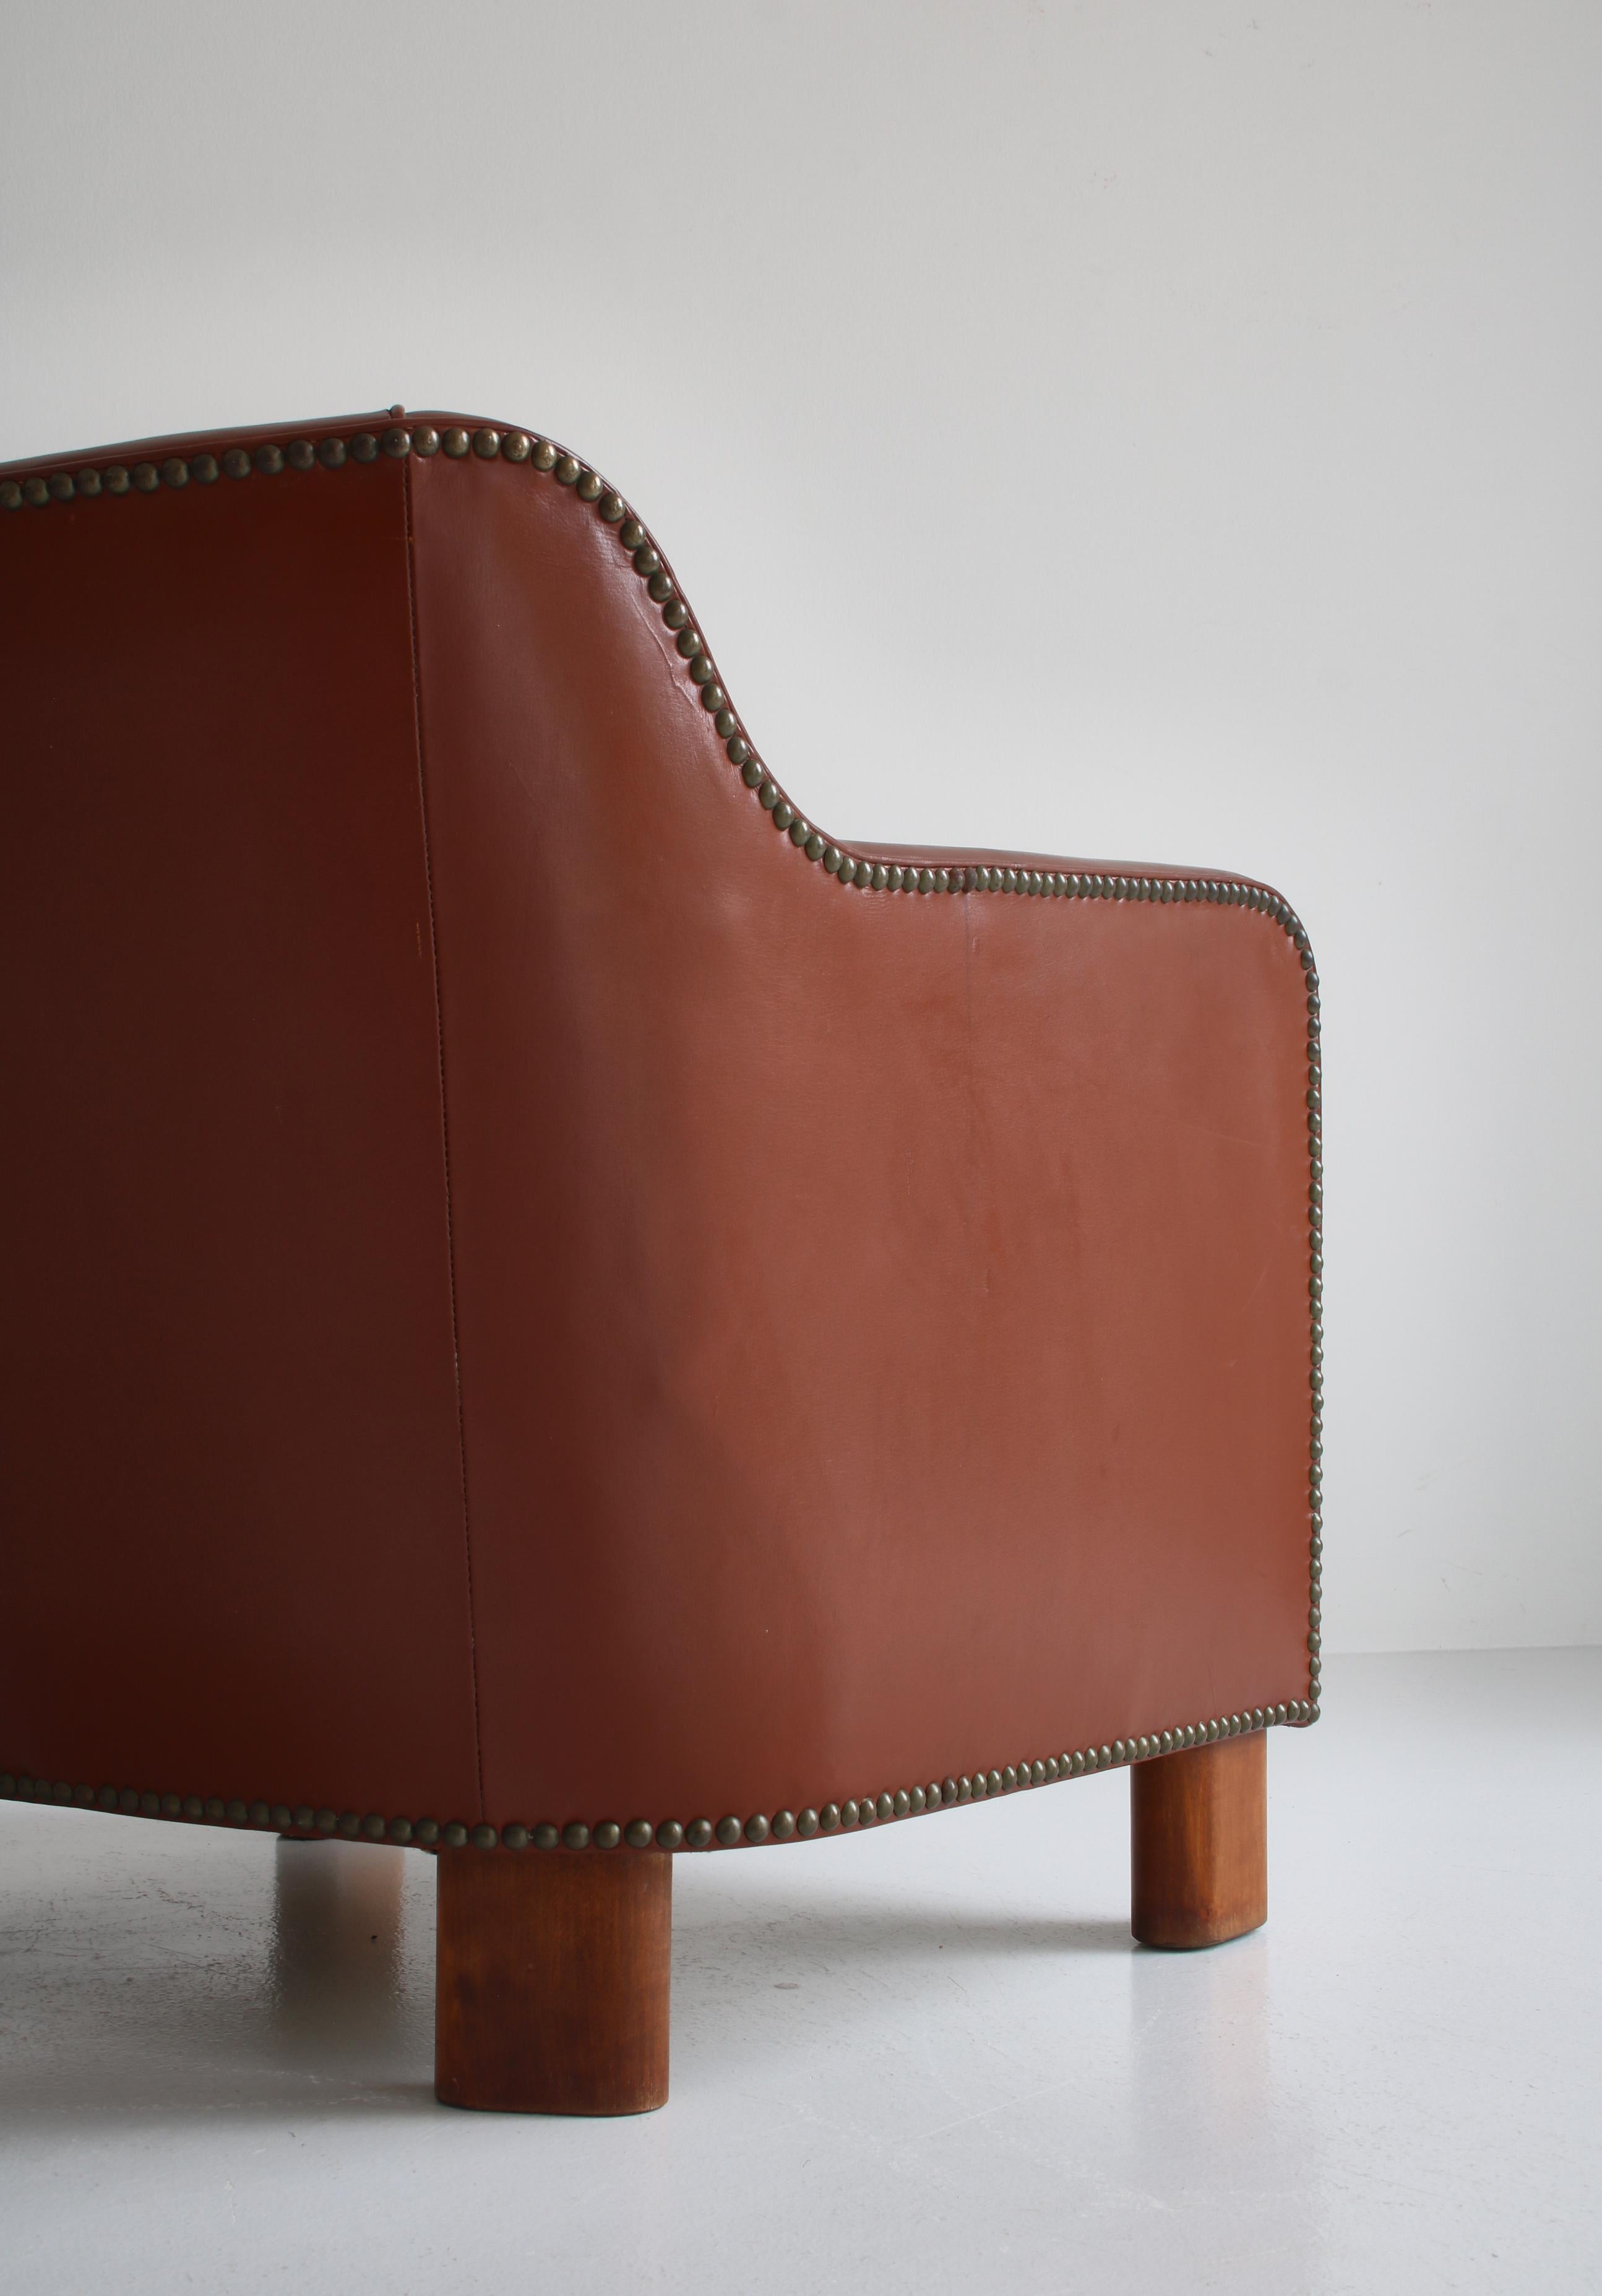 Fritz Hansen Danish Modern Easy Chair in Leather and Beech, 1940s For Sale 1